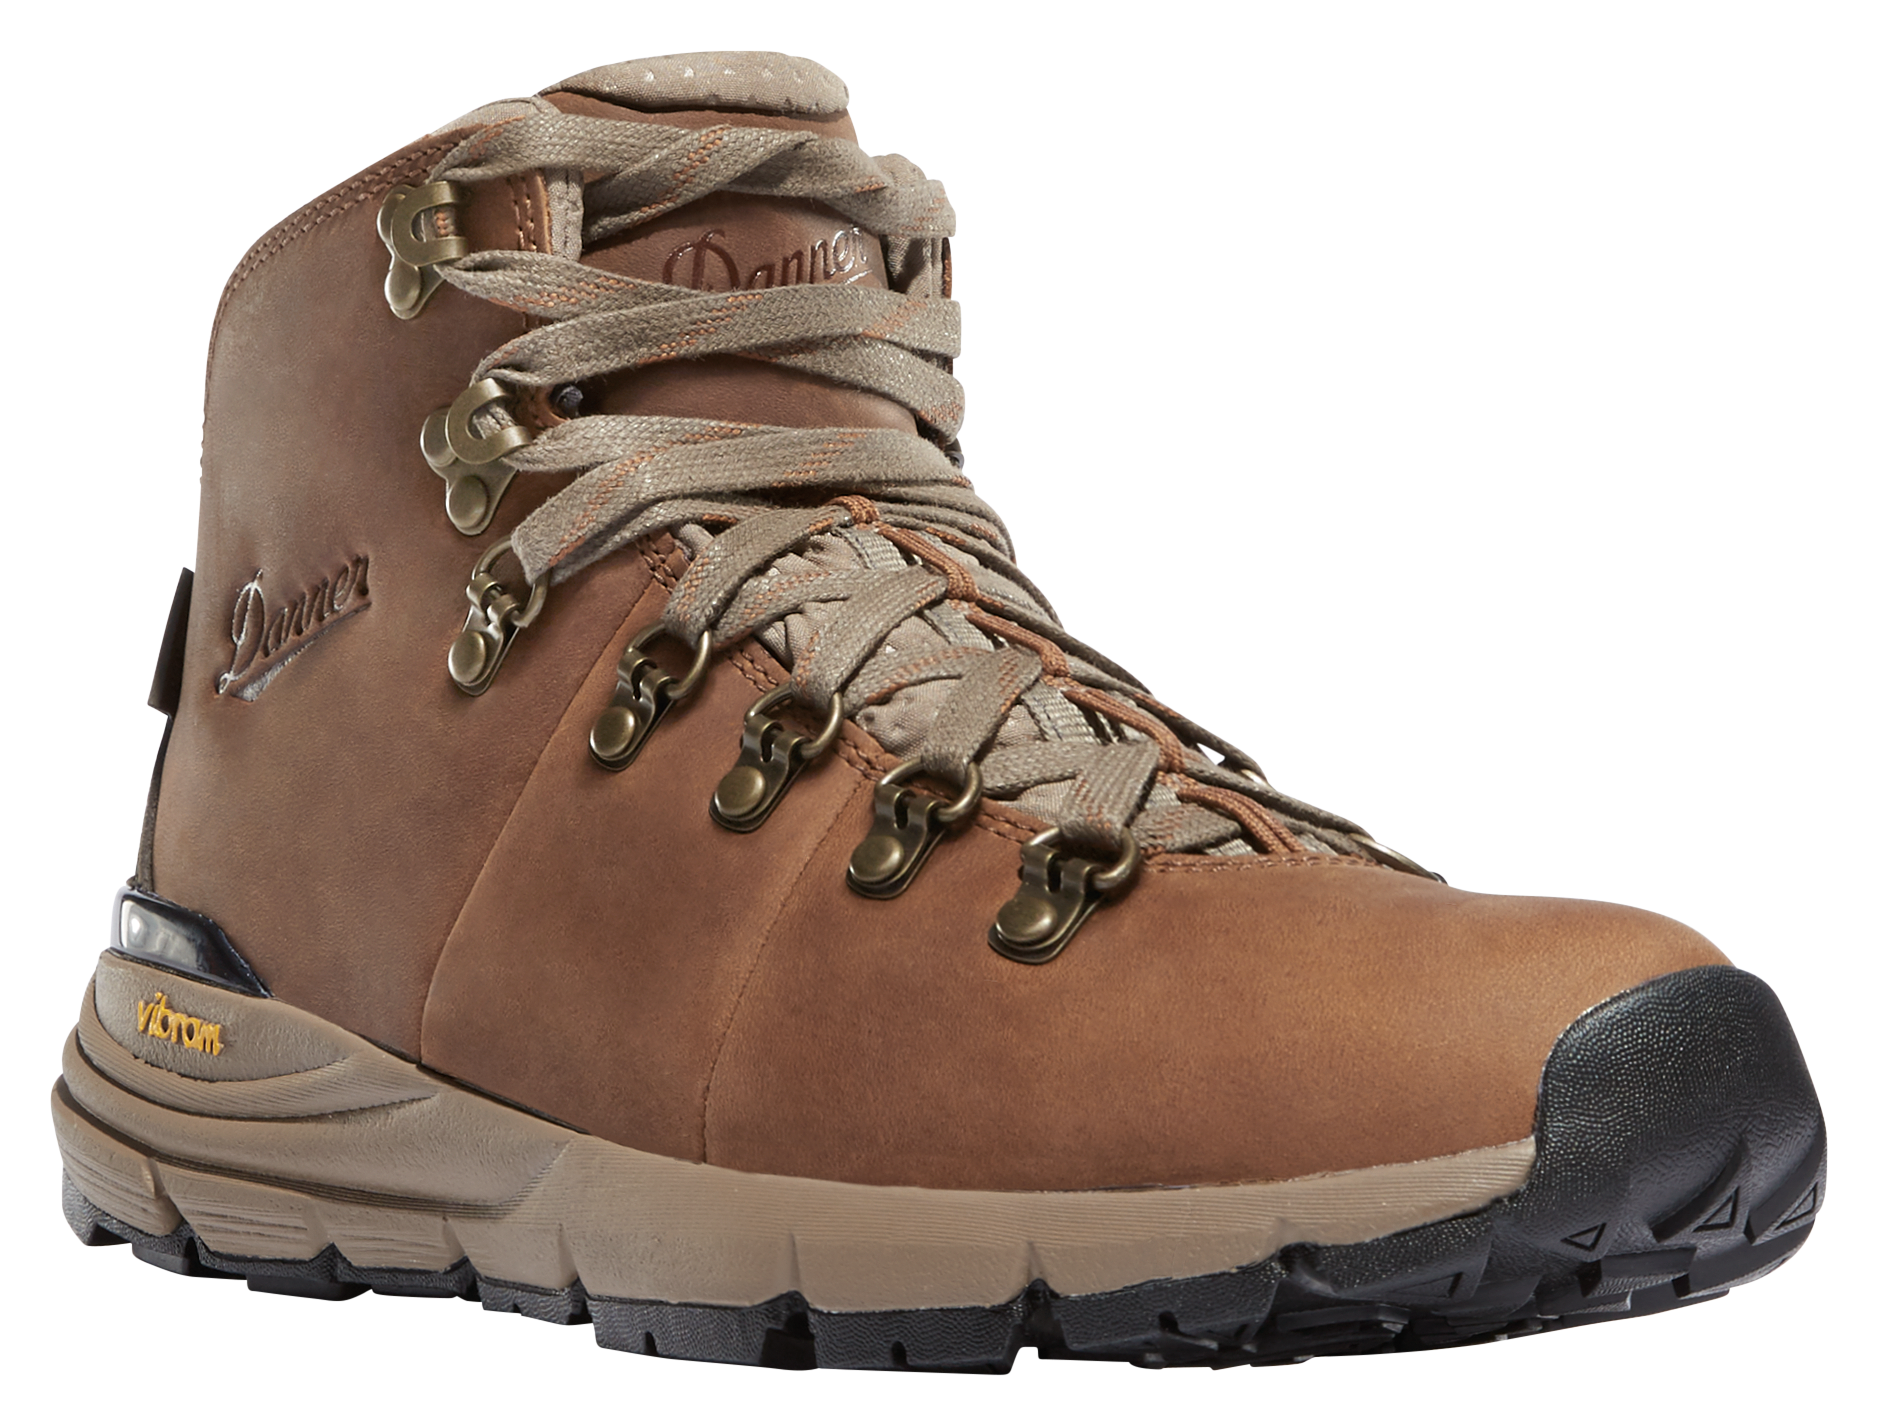 Danner Mountain 600 Leather Waterproof Hiking Boots for Ladies - Rich Brown - 9.5M